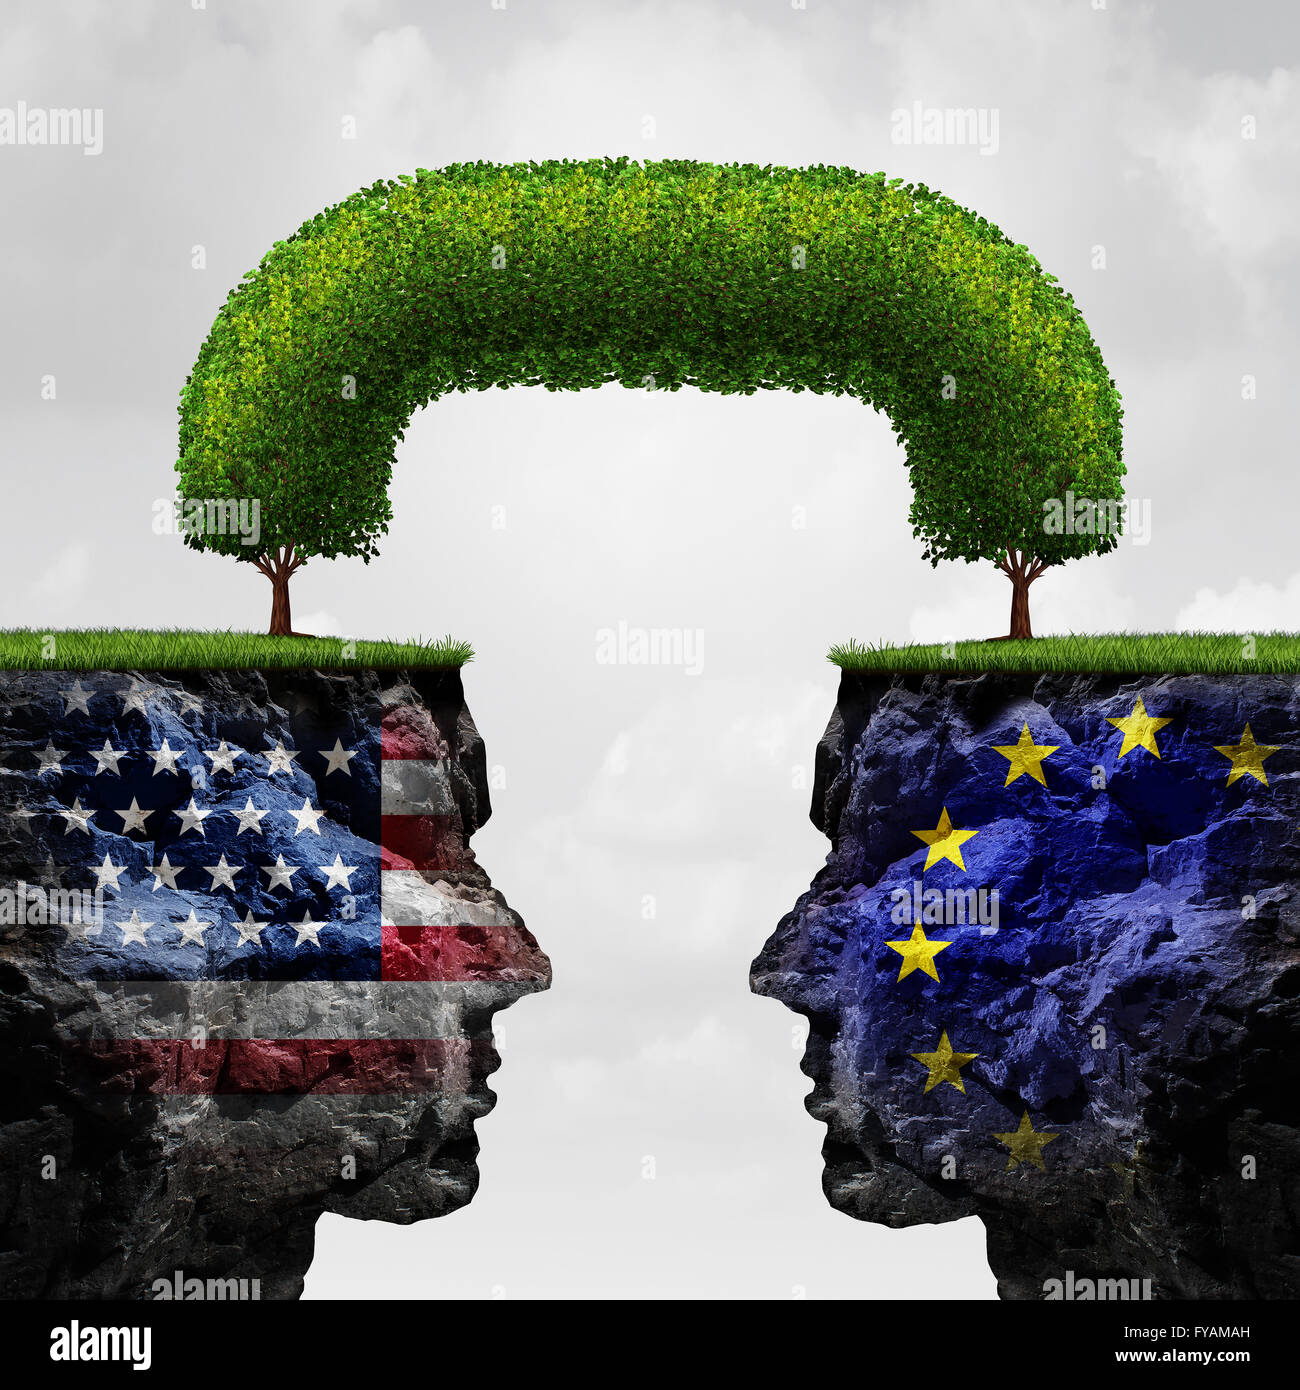 American European partnership and international trade agreement financial concept as two seperate mountain cliffs united together by a connected tree as a global cooperation symbol in a 3D illustration style. Stock Photo